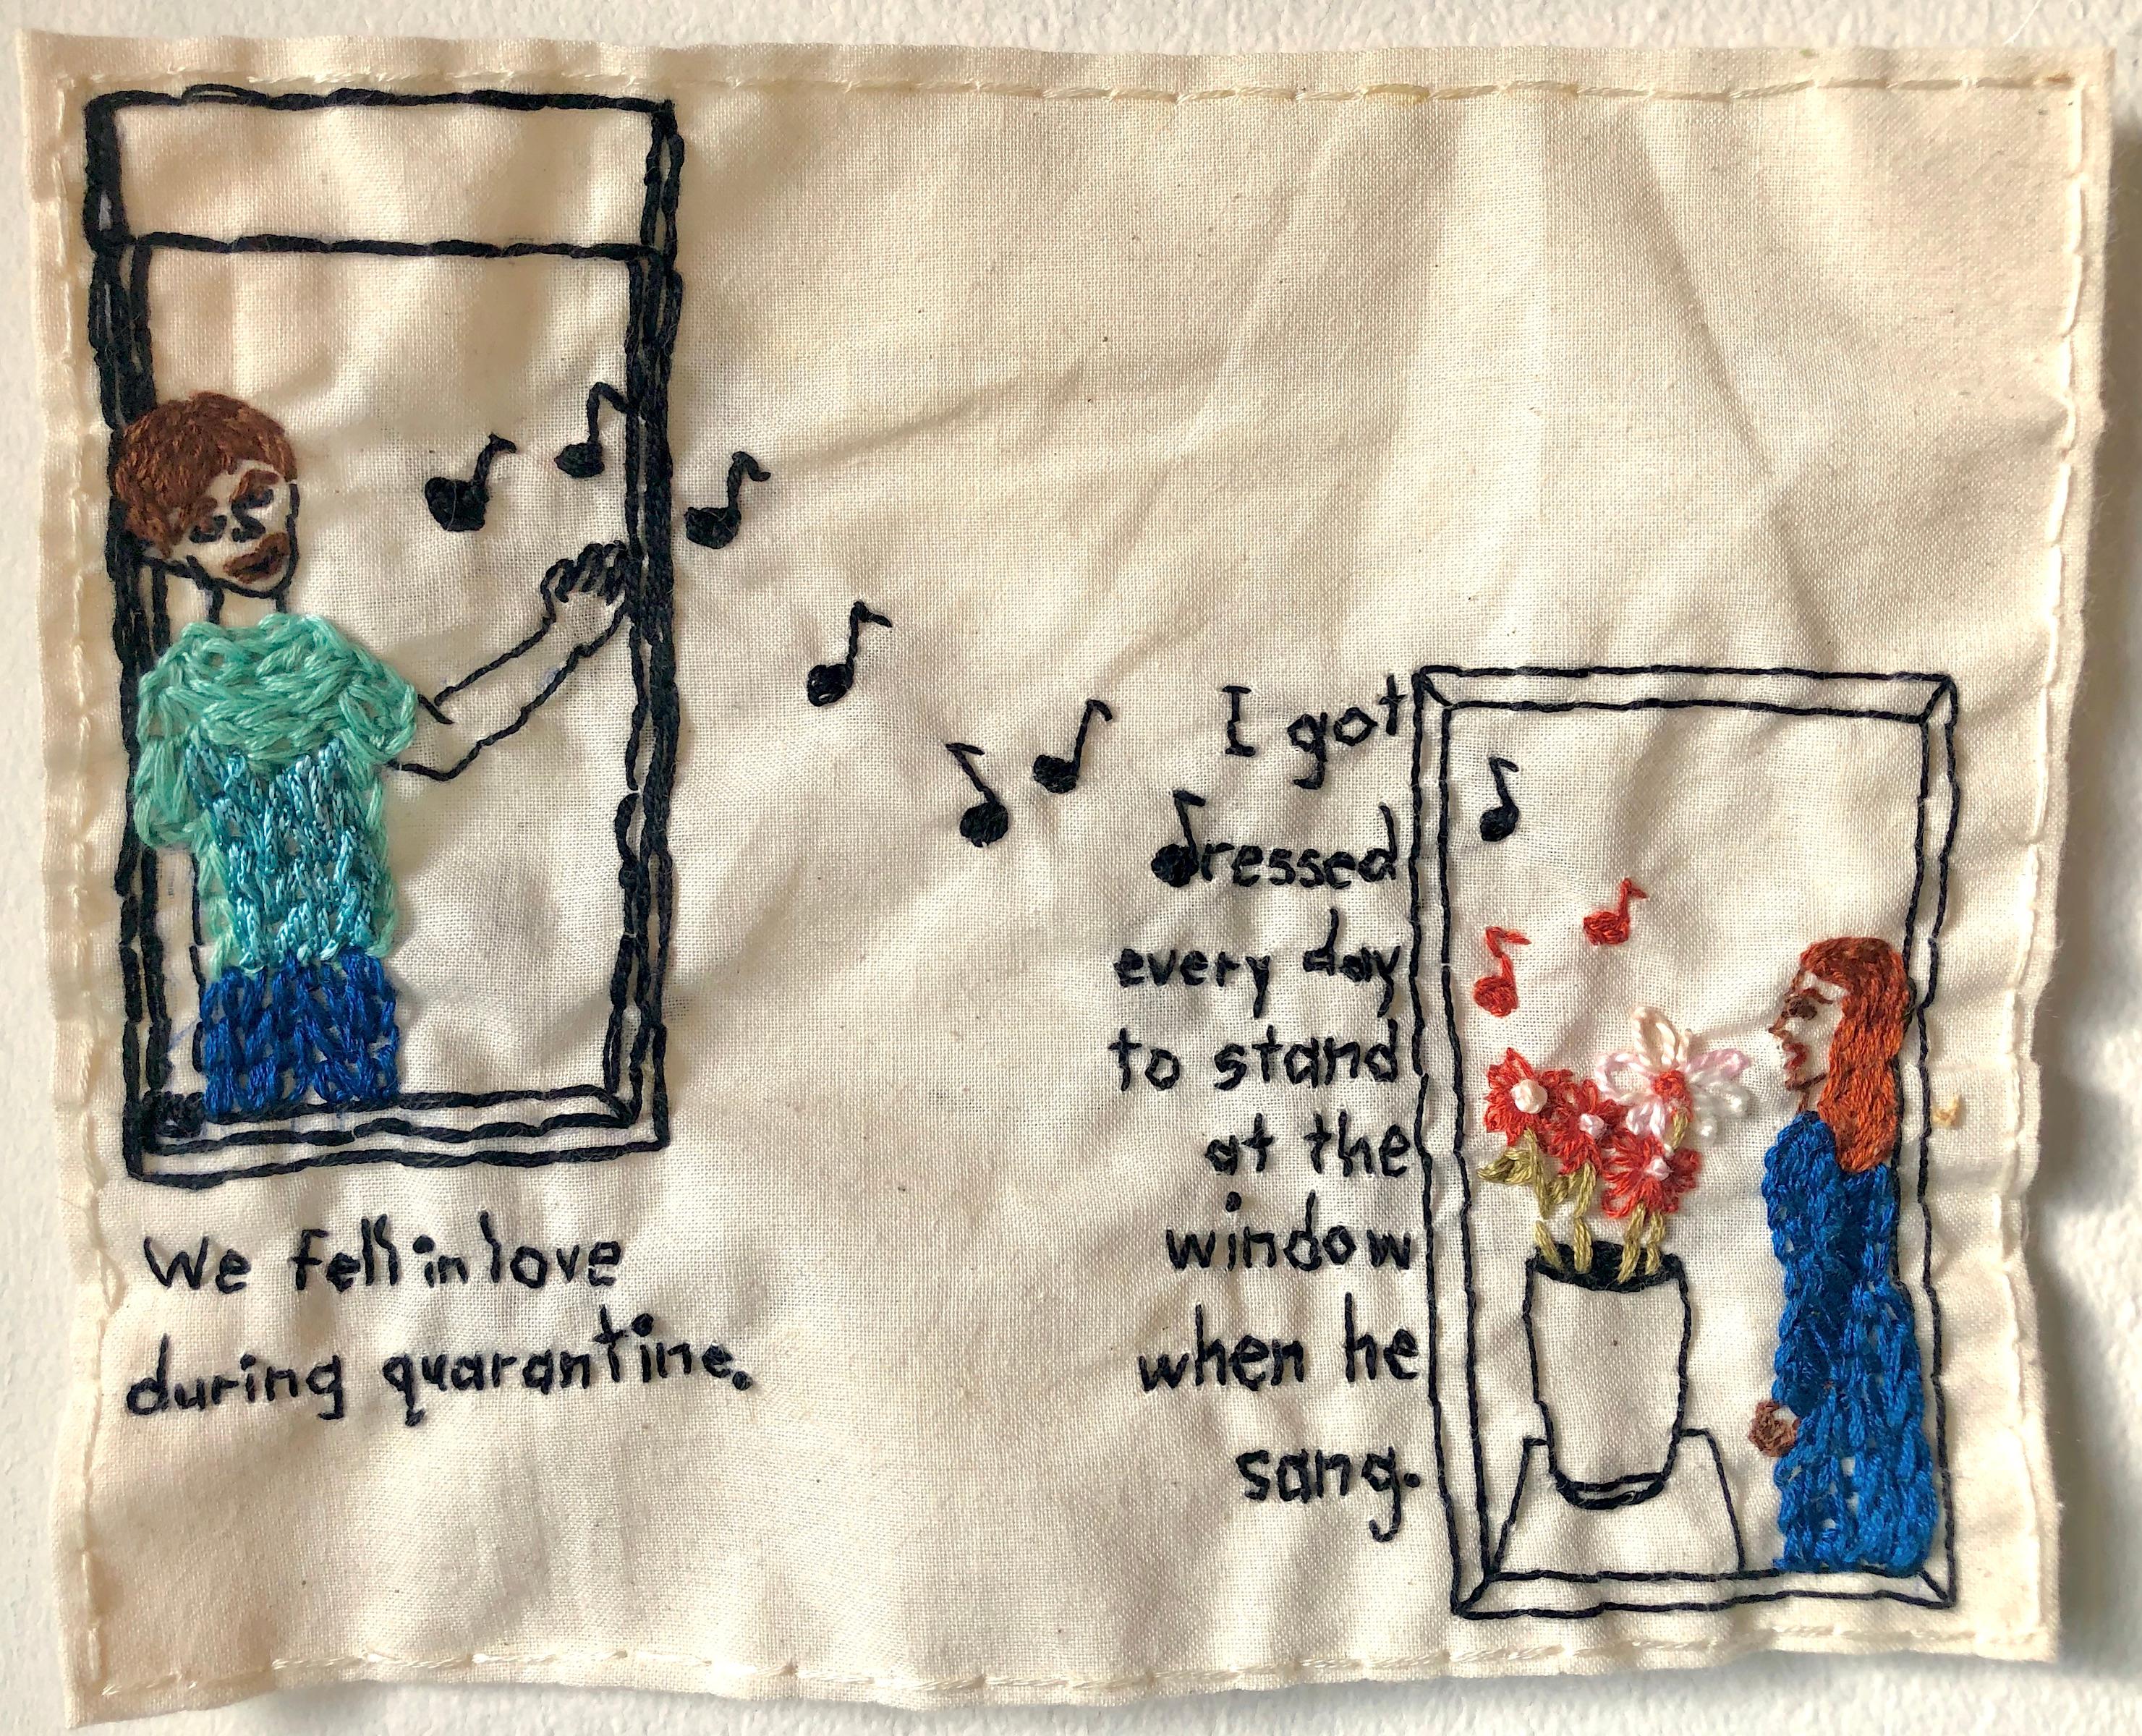 We fell in love during quarantine- love narrative embroidery on vintage fabric - Mixed Media Art by Iviva Olenick